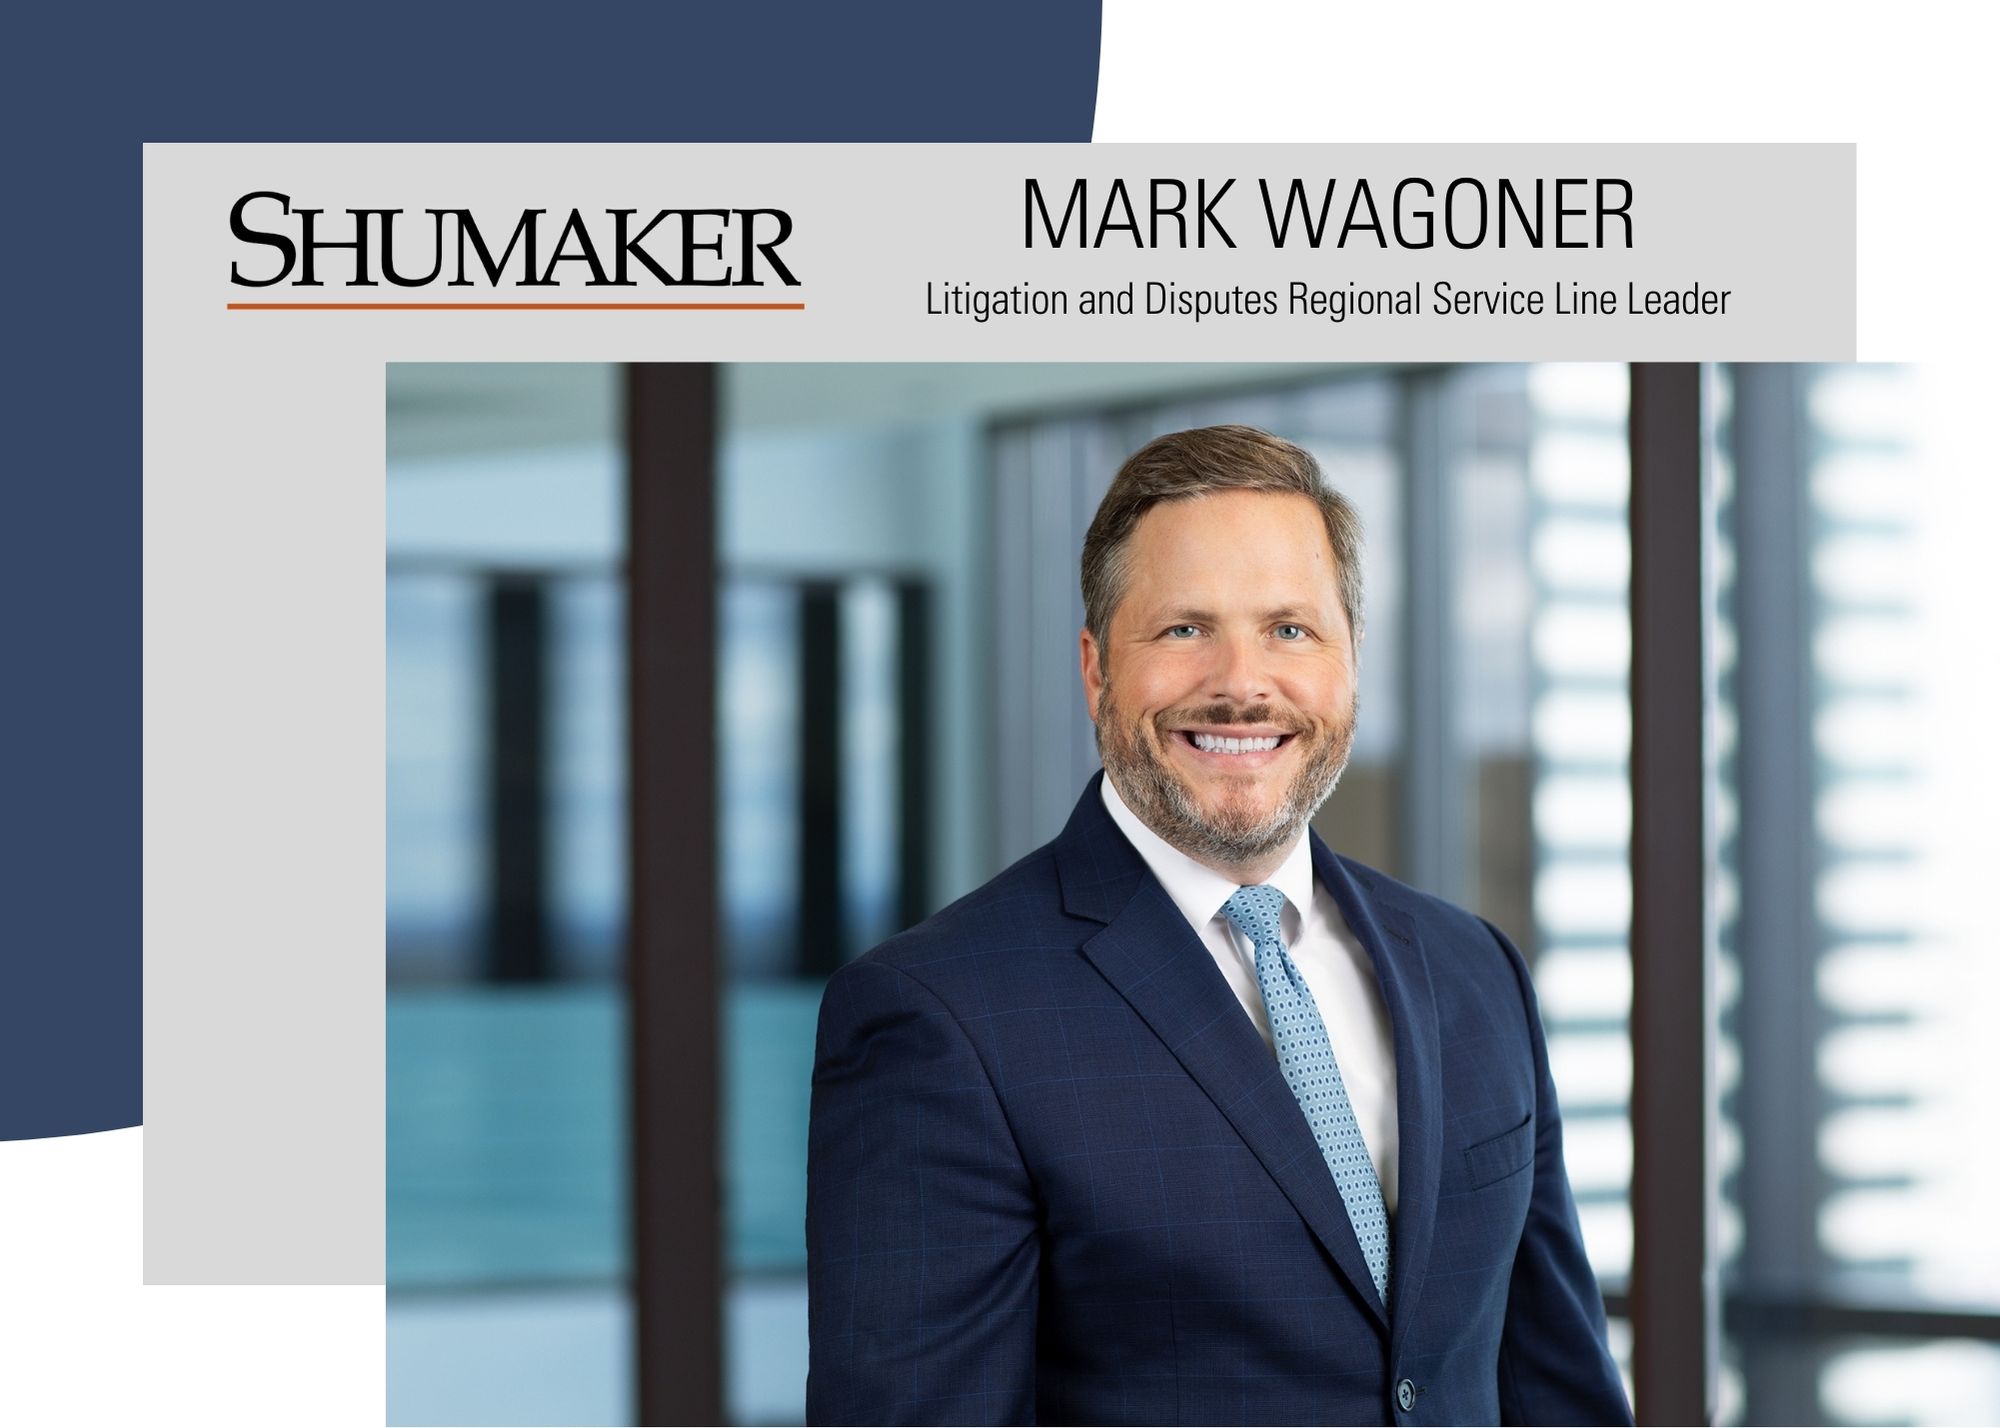 Mark Wagoner to Chair Antitrust Committee of the Ohio State Bar Association